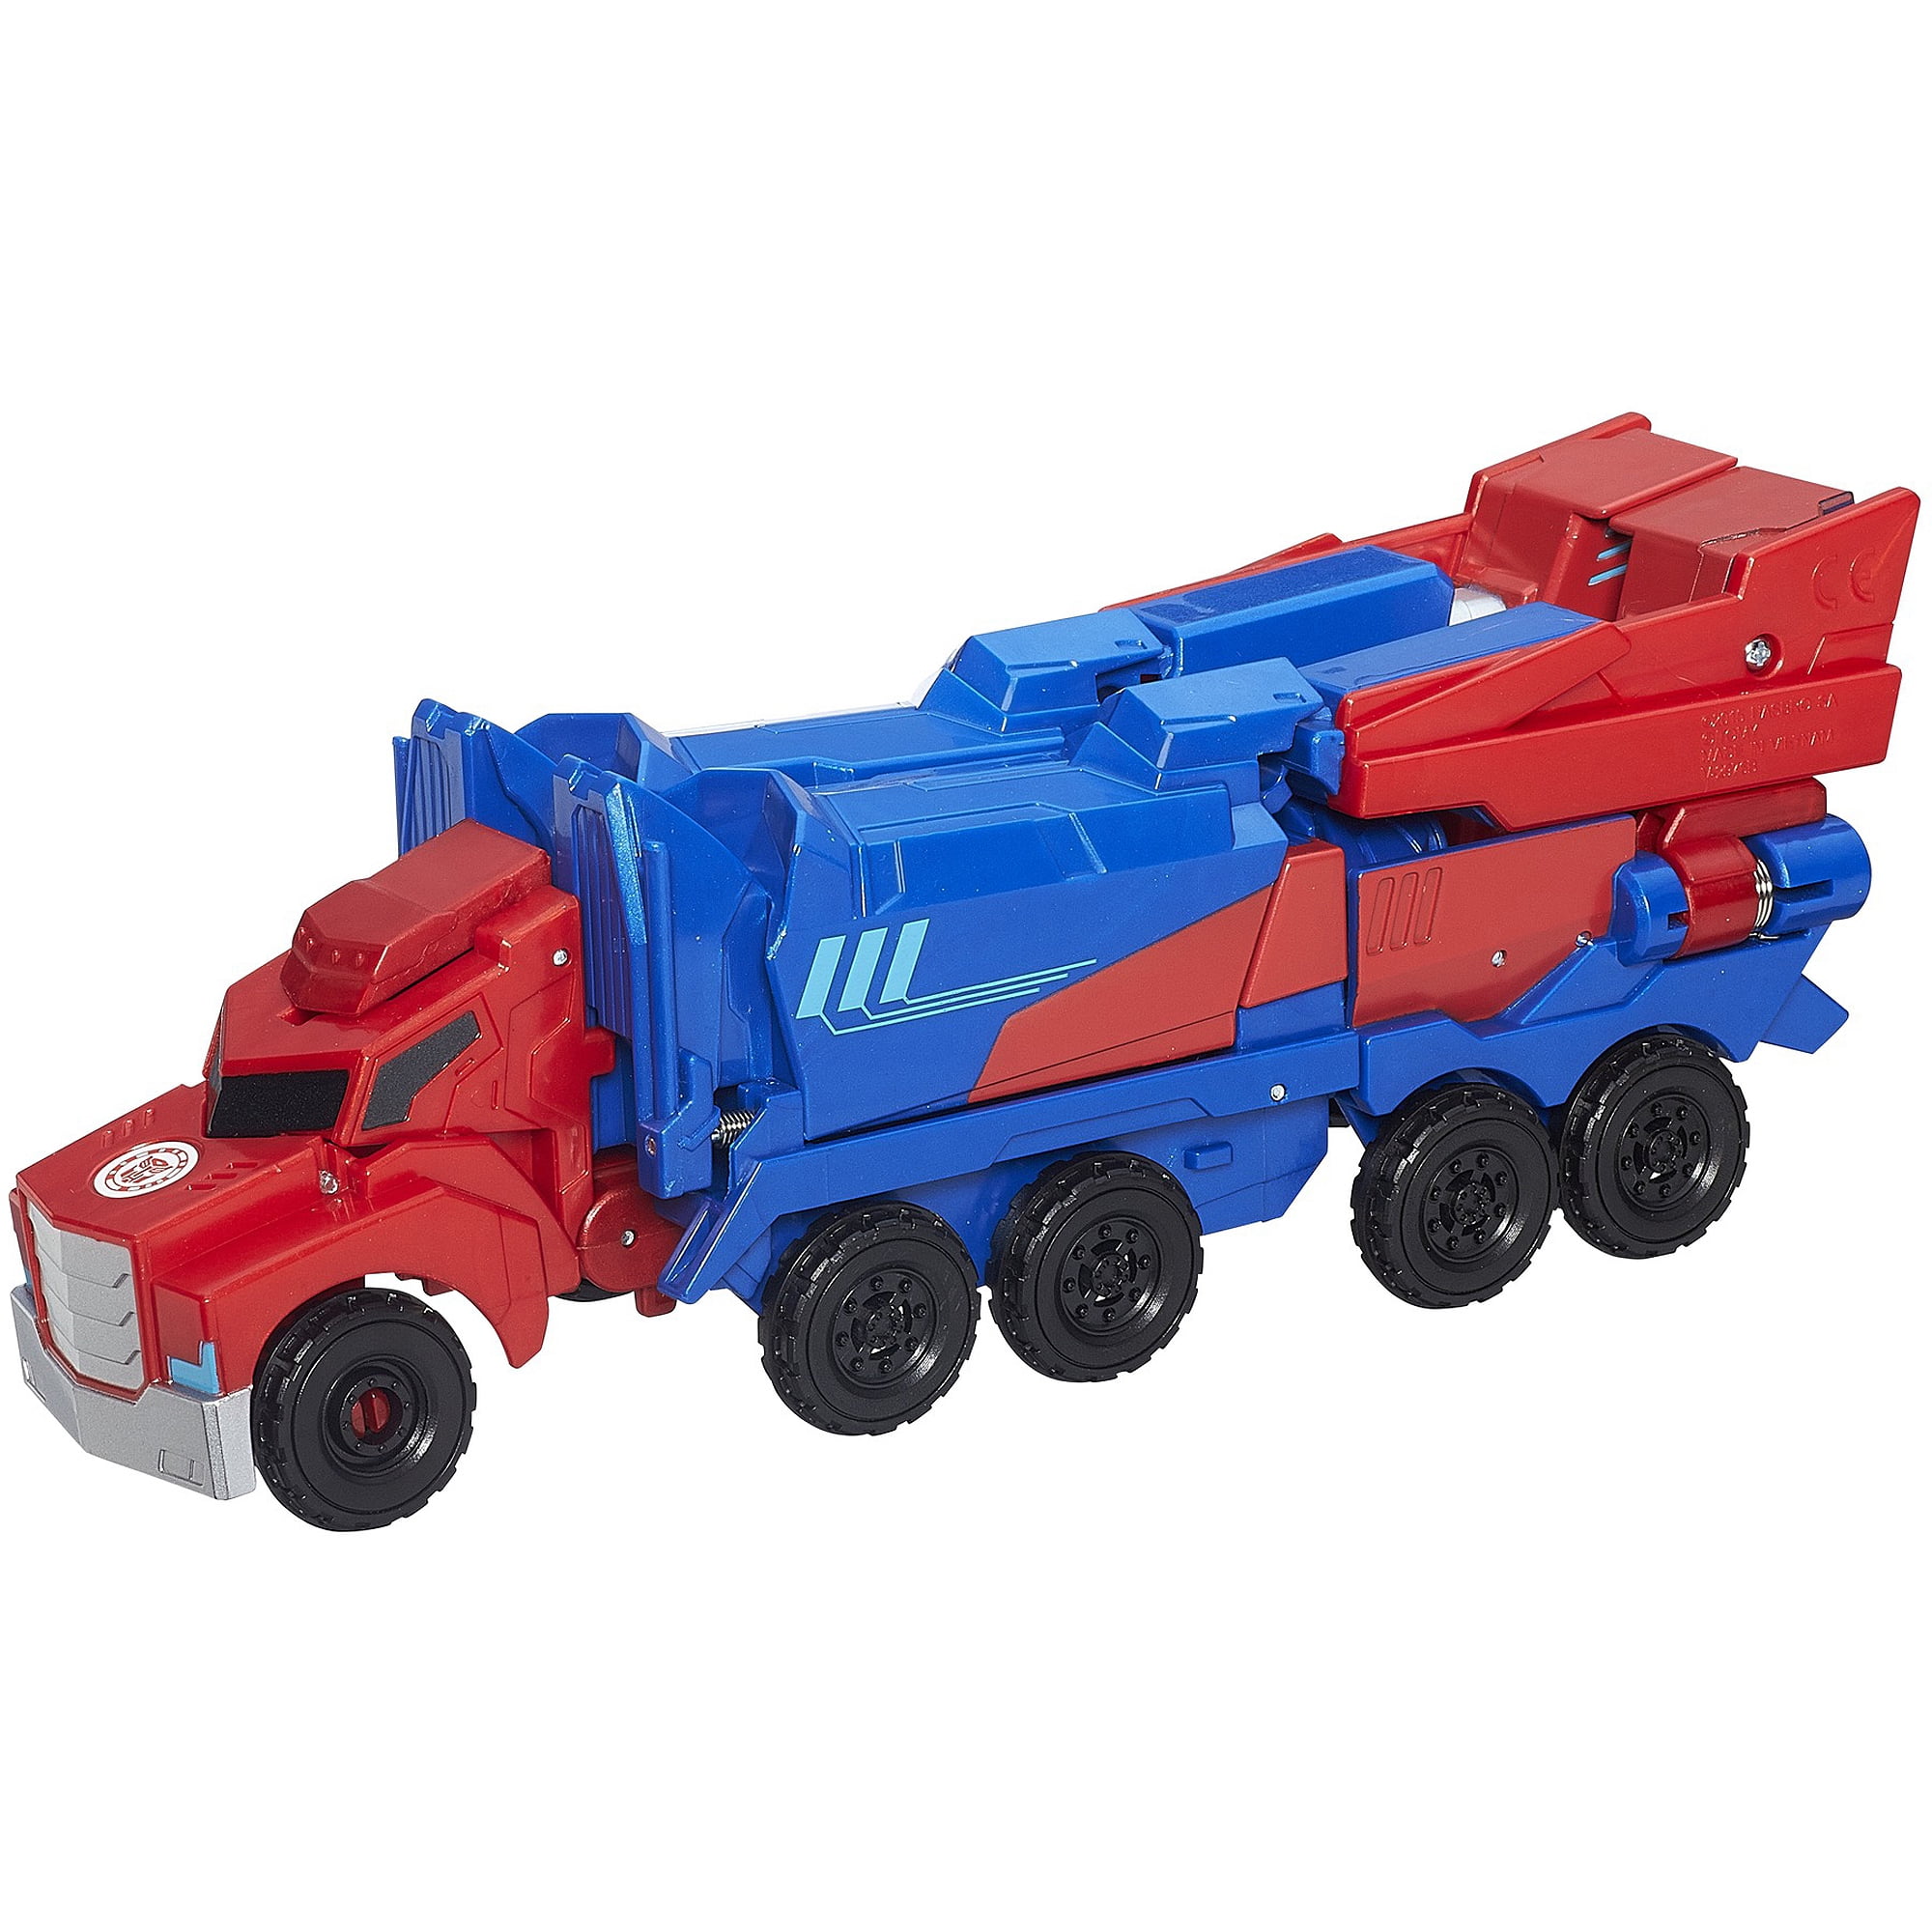 Transformers Robots in Disguise Hyper Change Optimus Prime 